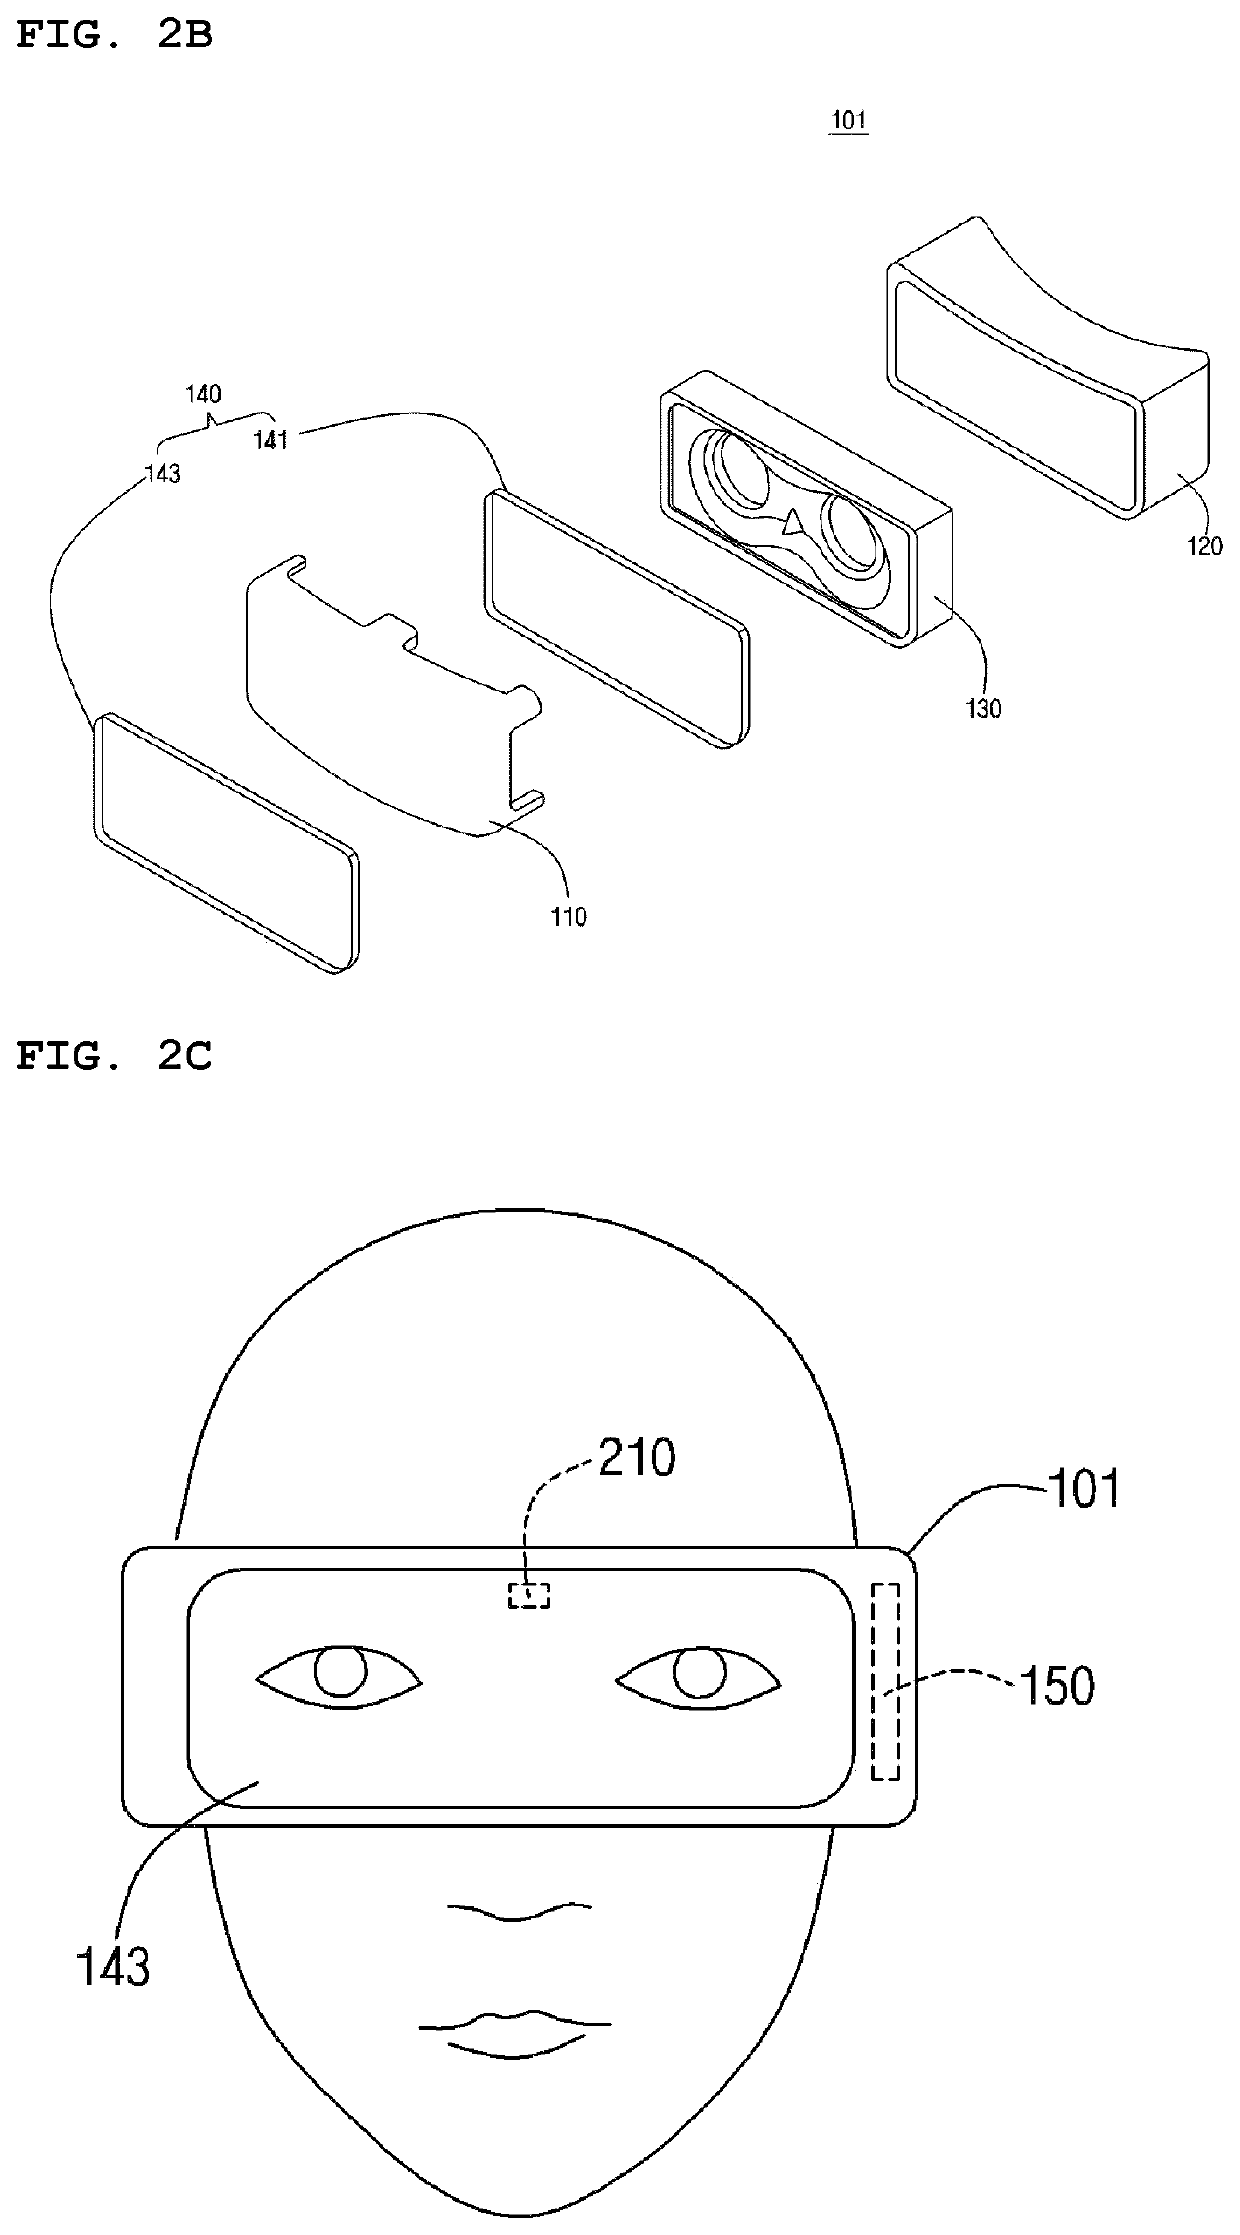 Virtual reality-based portable nystagmography device and diagnostic test method using same